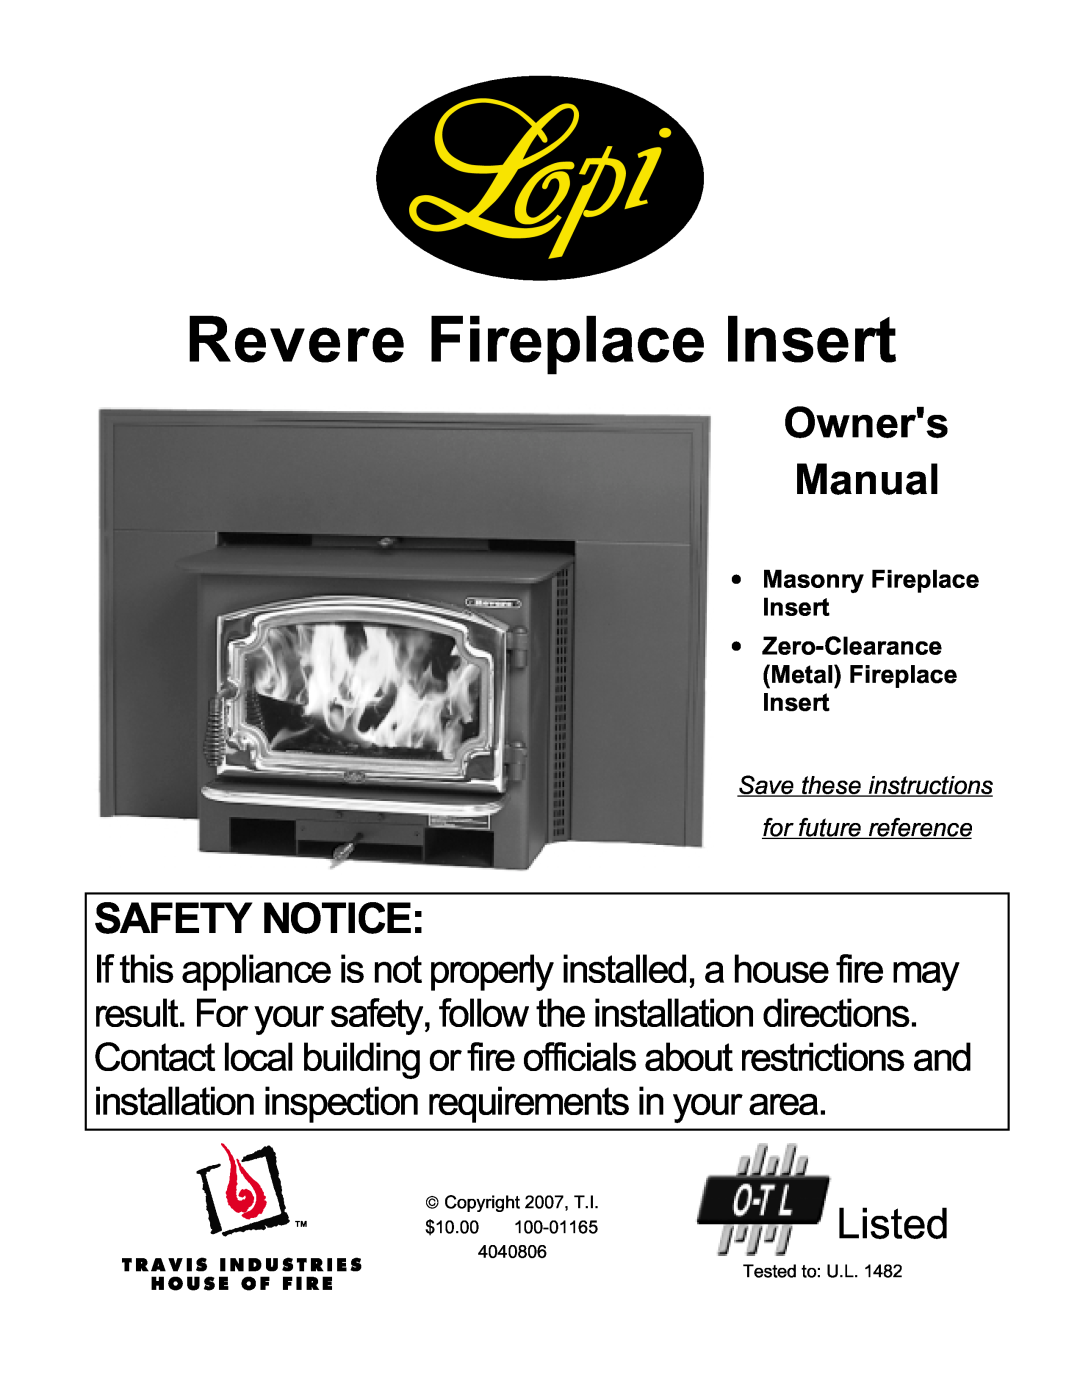 Lopi owner manual Revere Fireplace Insert, Safety Notice, Listed 